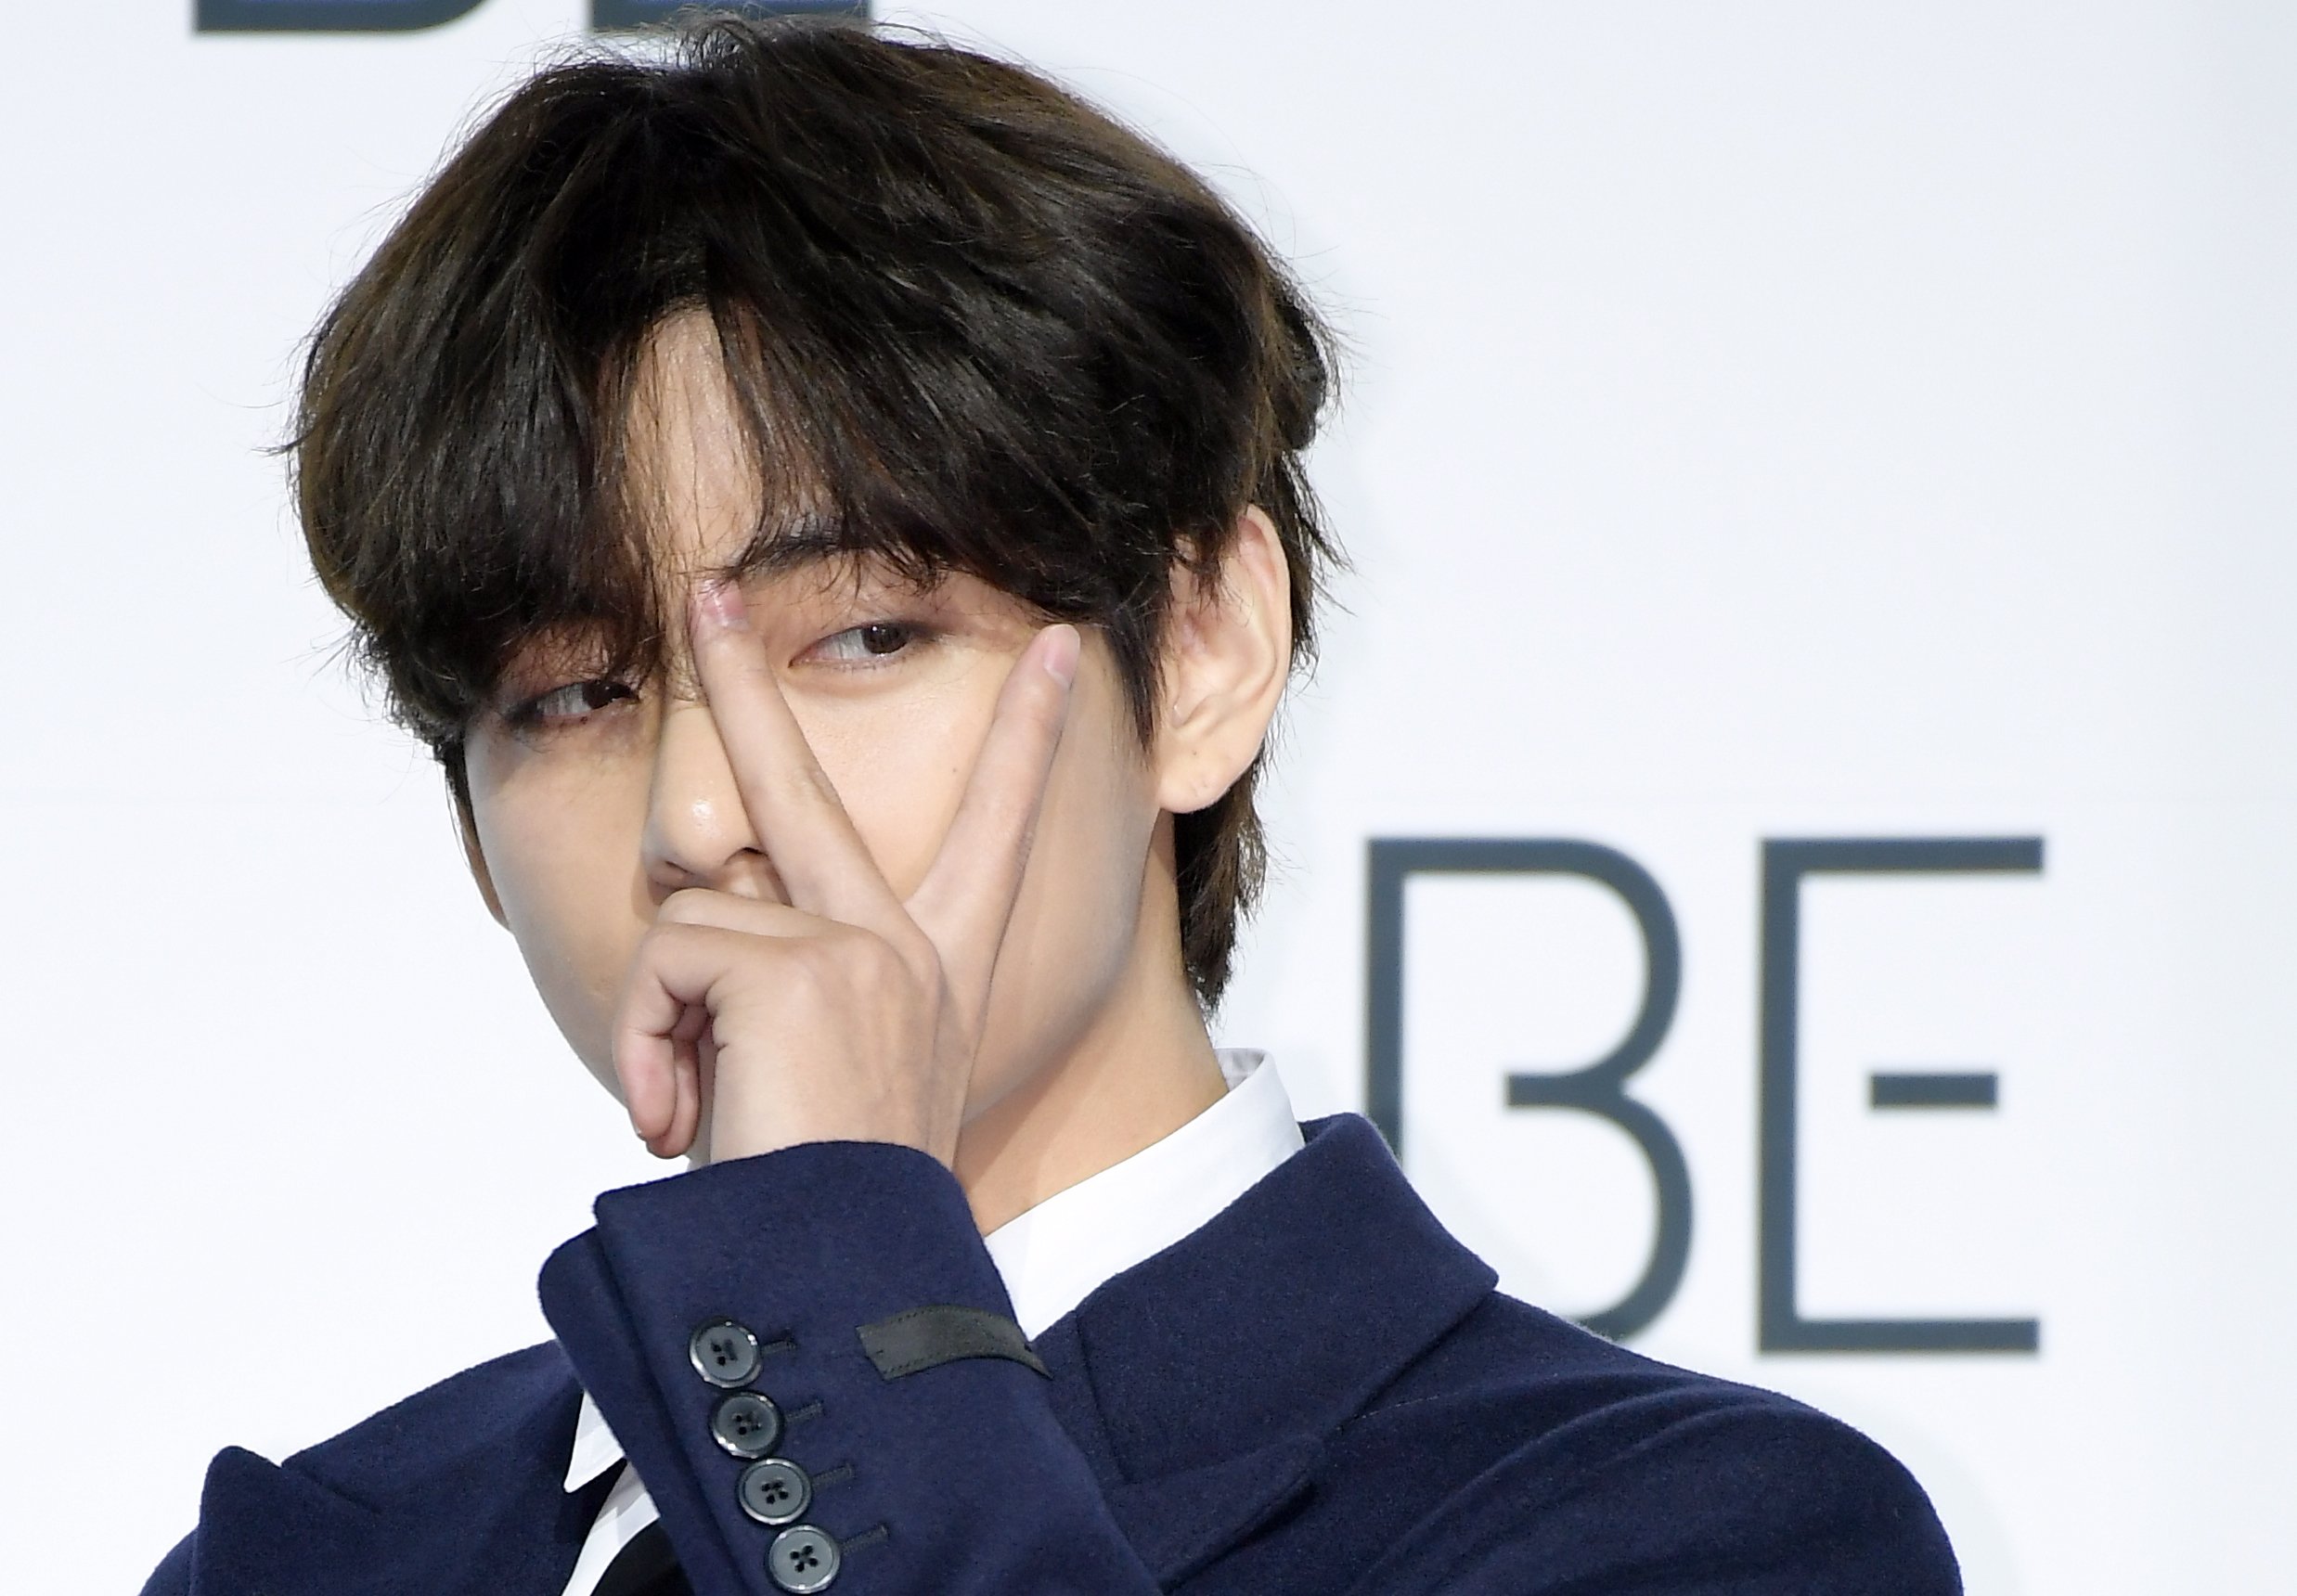 V of BTS holds up the peace sign at the band's press conference for 'BE' in 2020